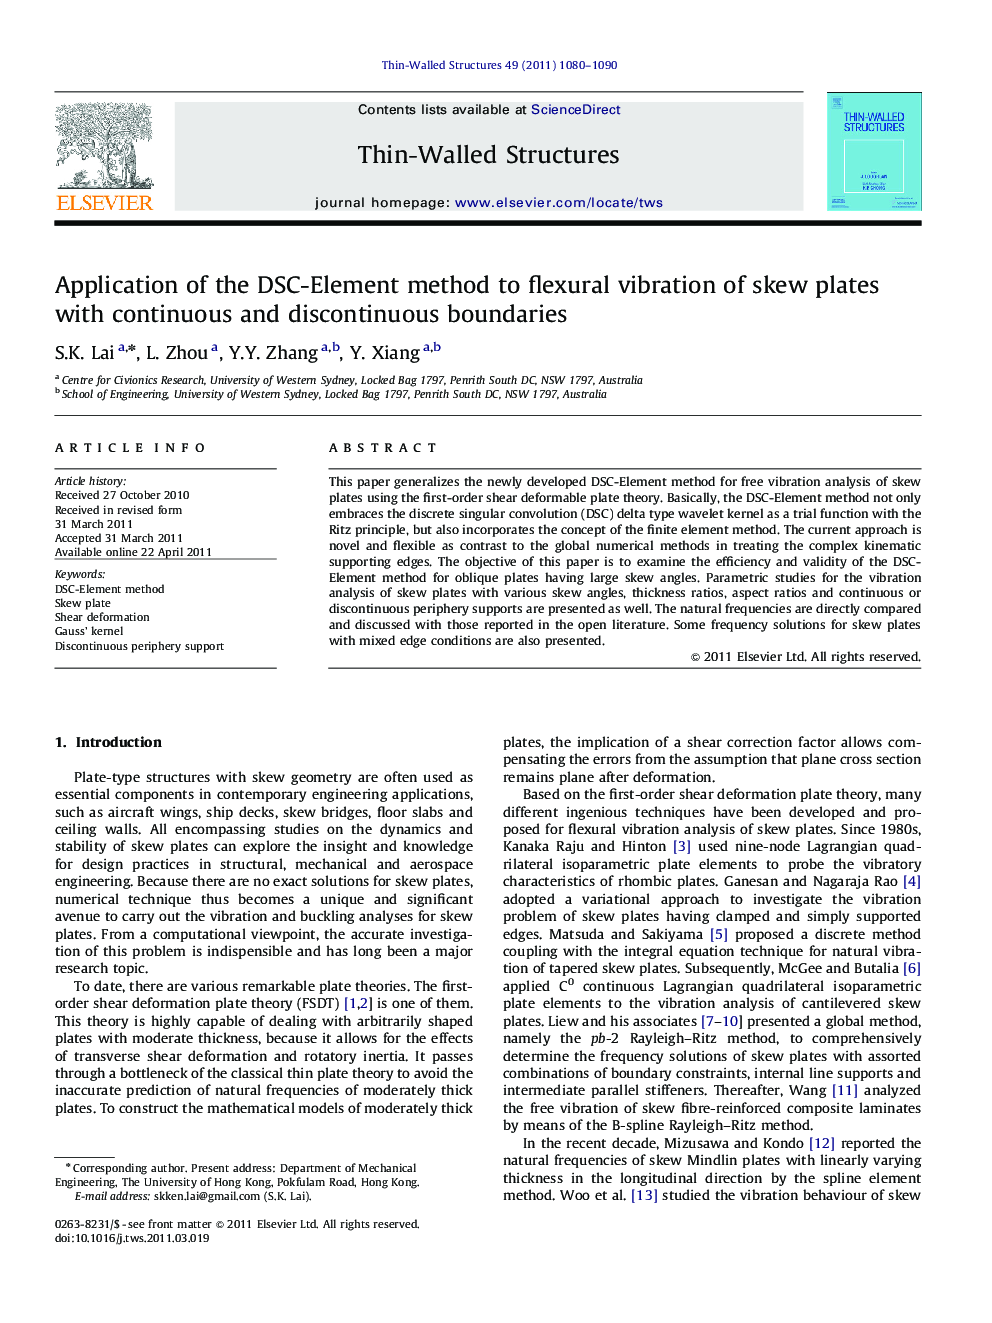 Application of the DSC-Element method to flexural vibration of skew plates with continuous and discontinuous boundaries